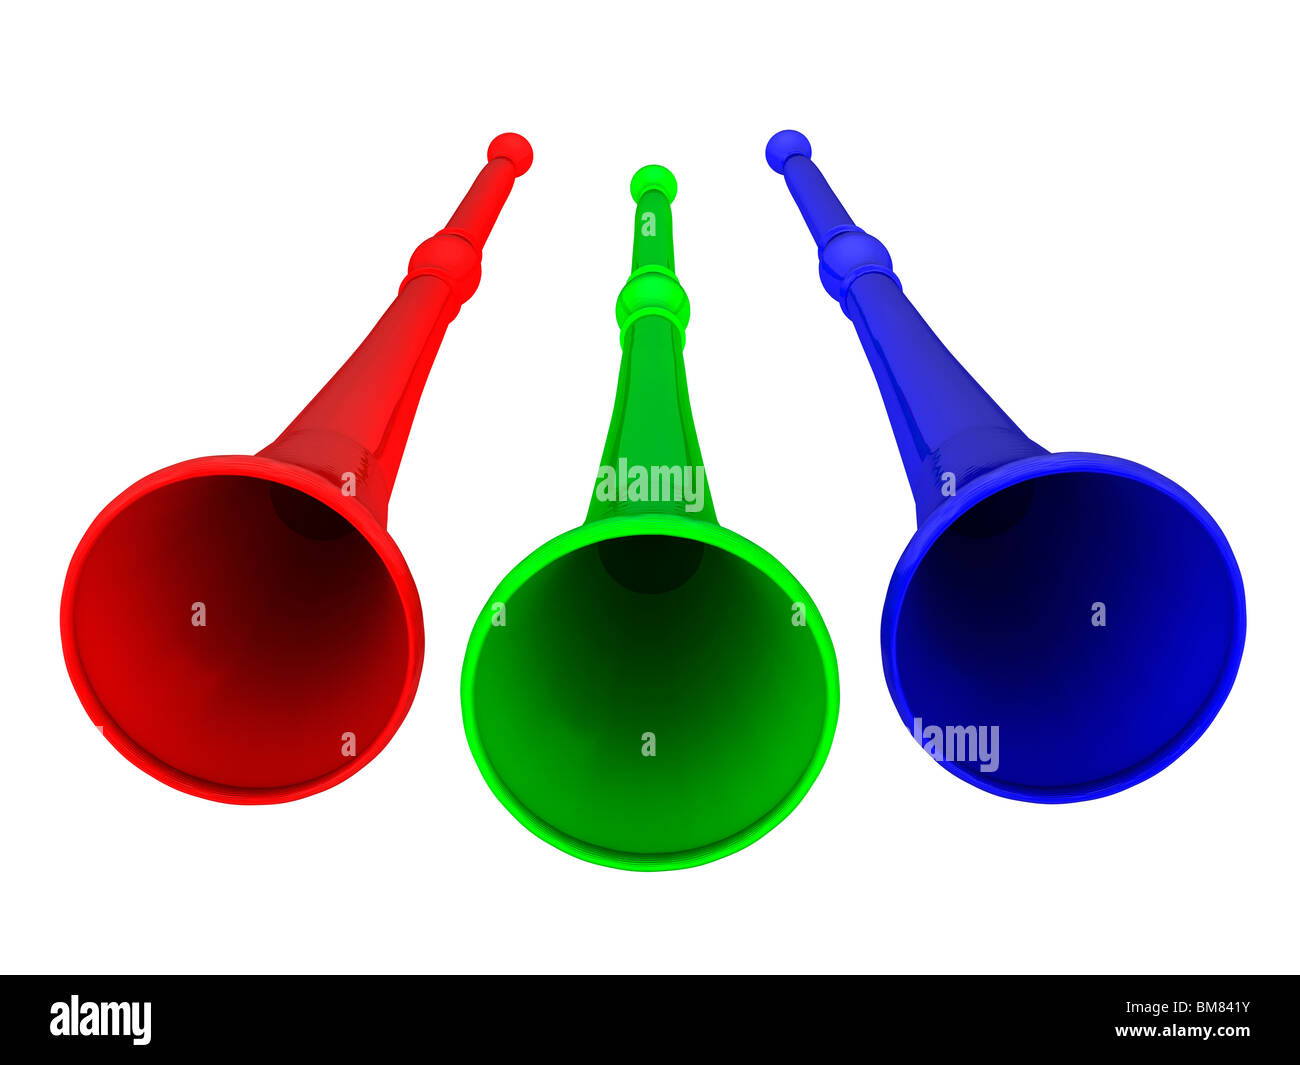 Vuvuzela horns in red green and blue on white background Stock Photo